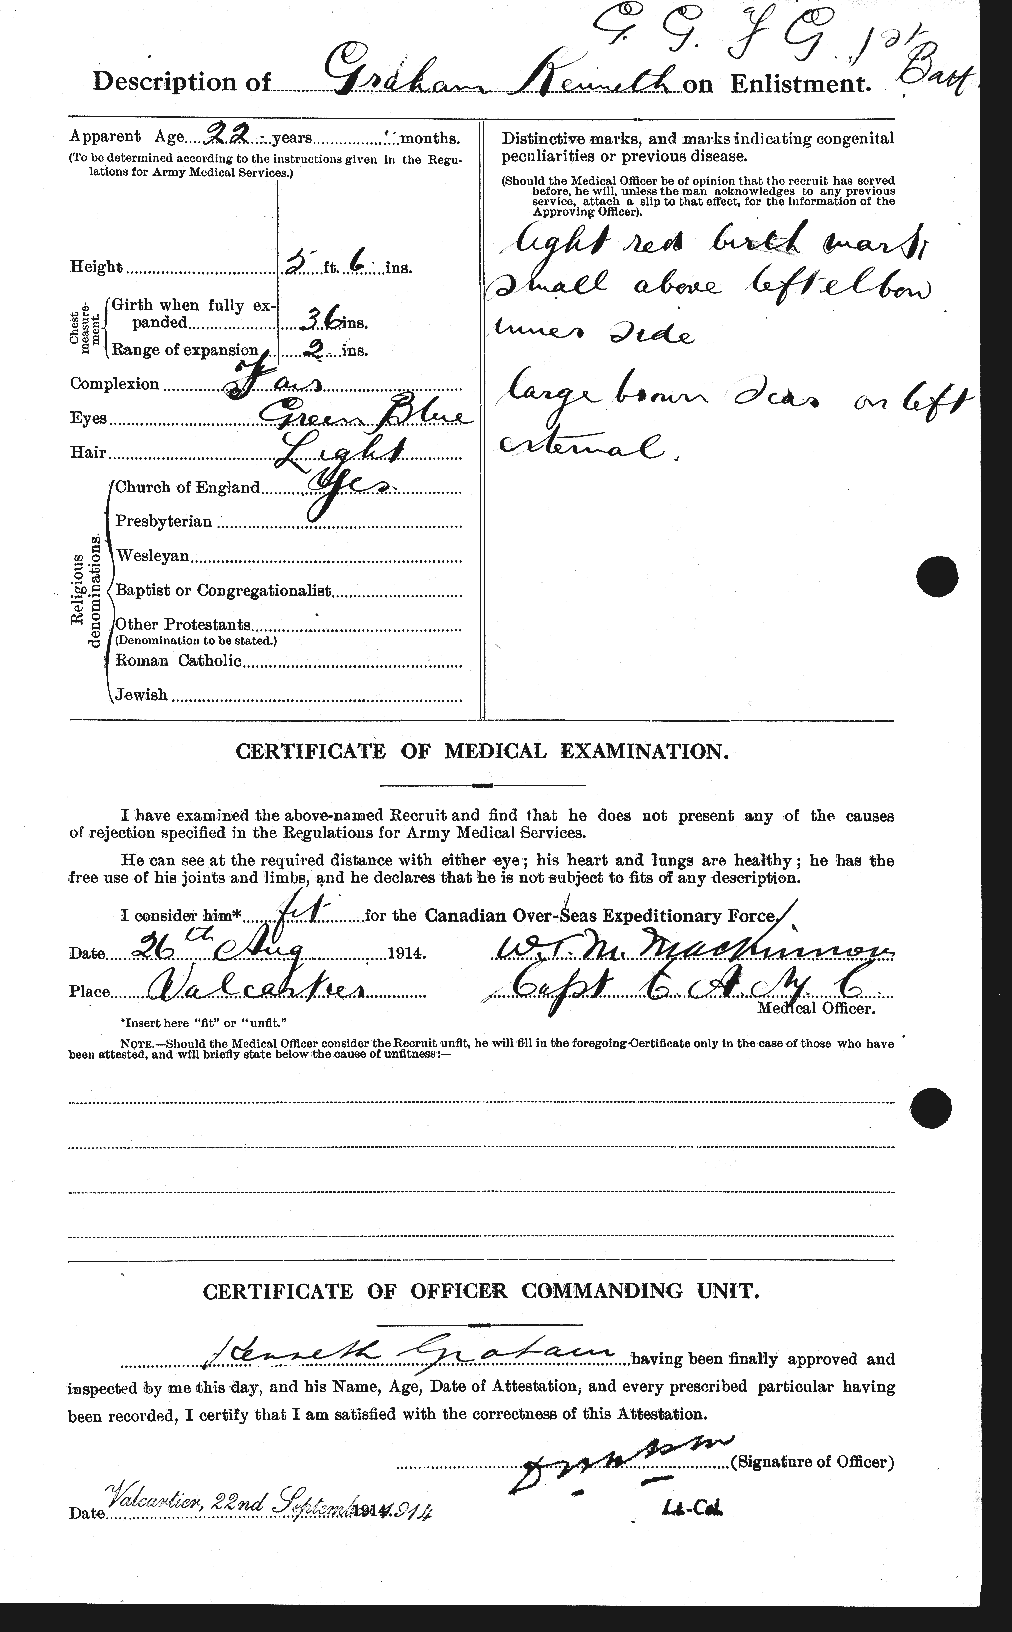 Personnel Records of the First World War - CEF 359258b